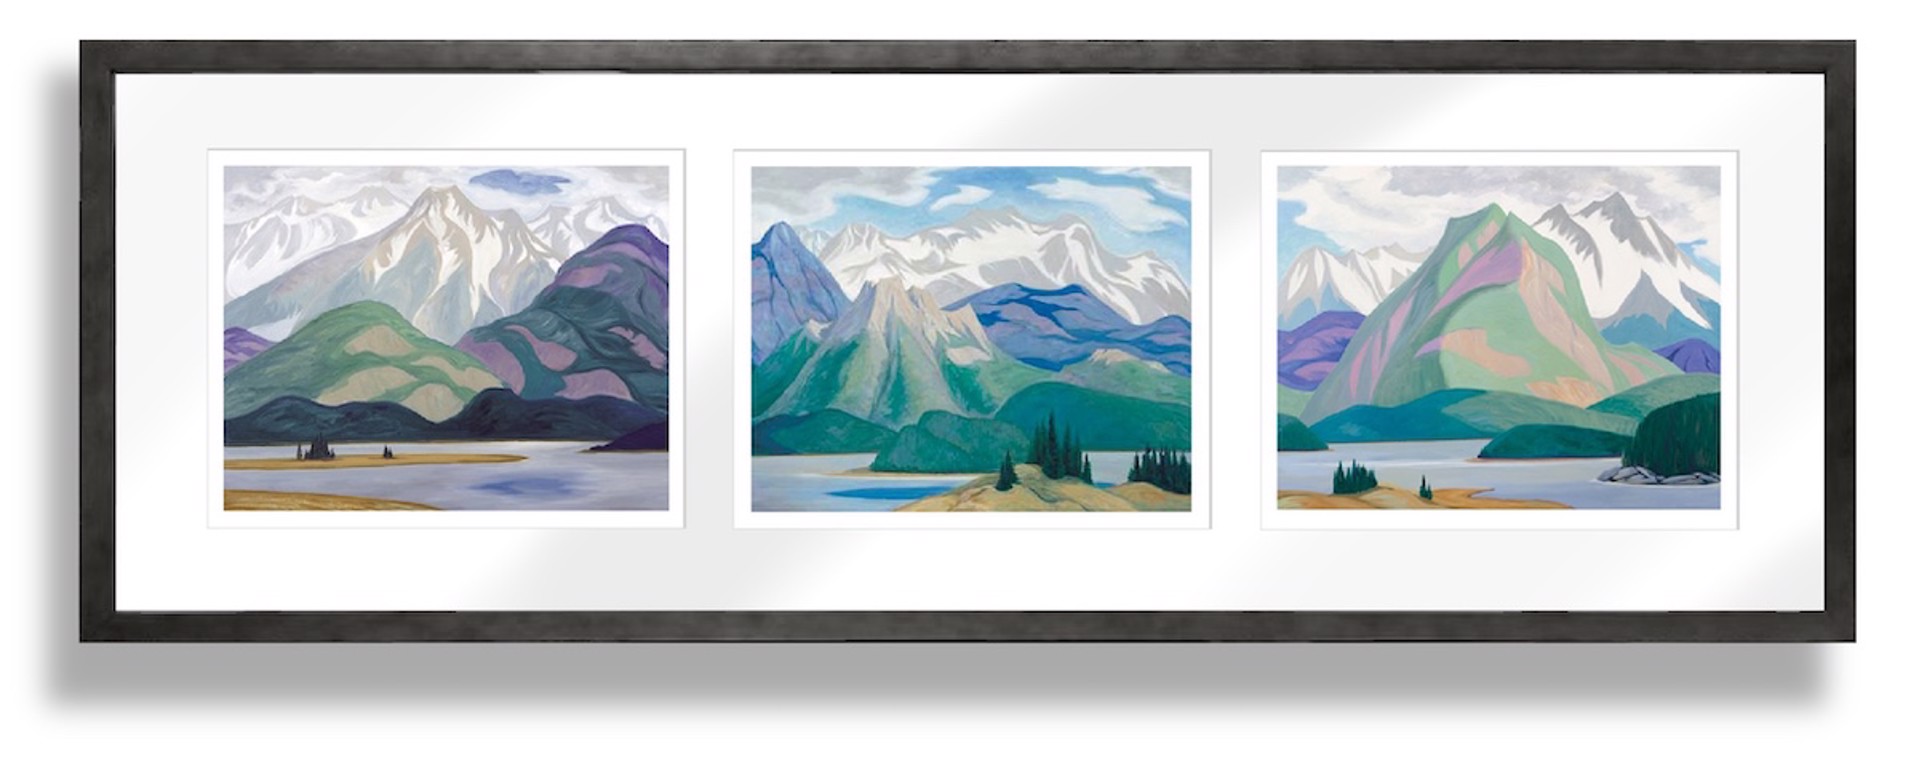 Along the Athabasca Triptych by Doris McCarthy